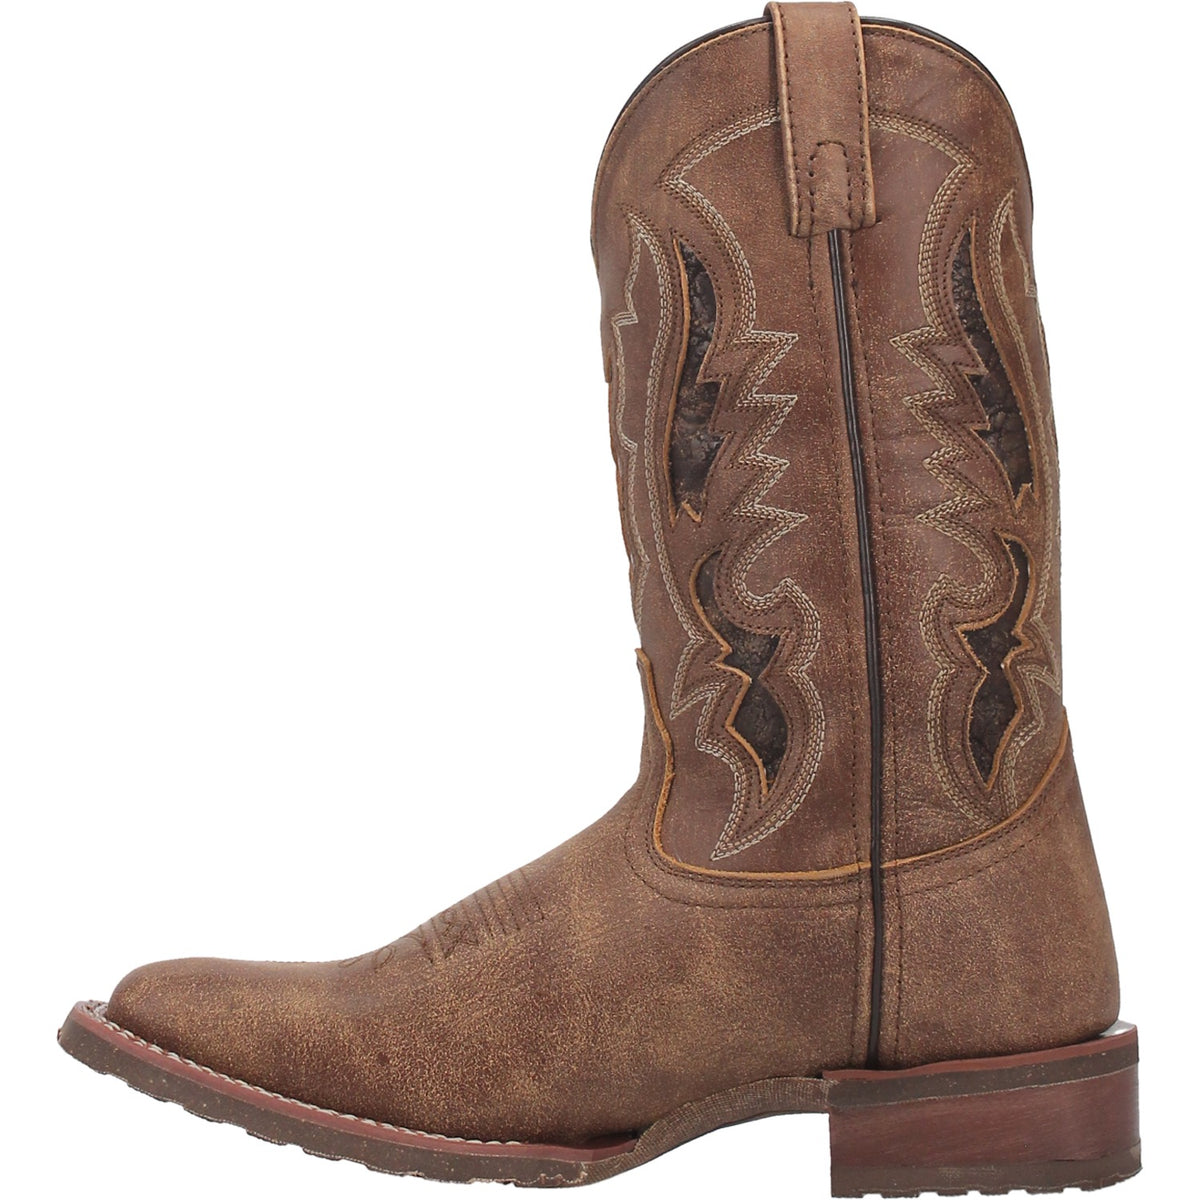 MARTIE LEATHER BOOT Cover